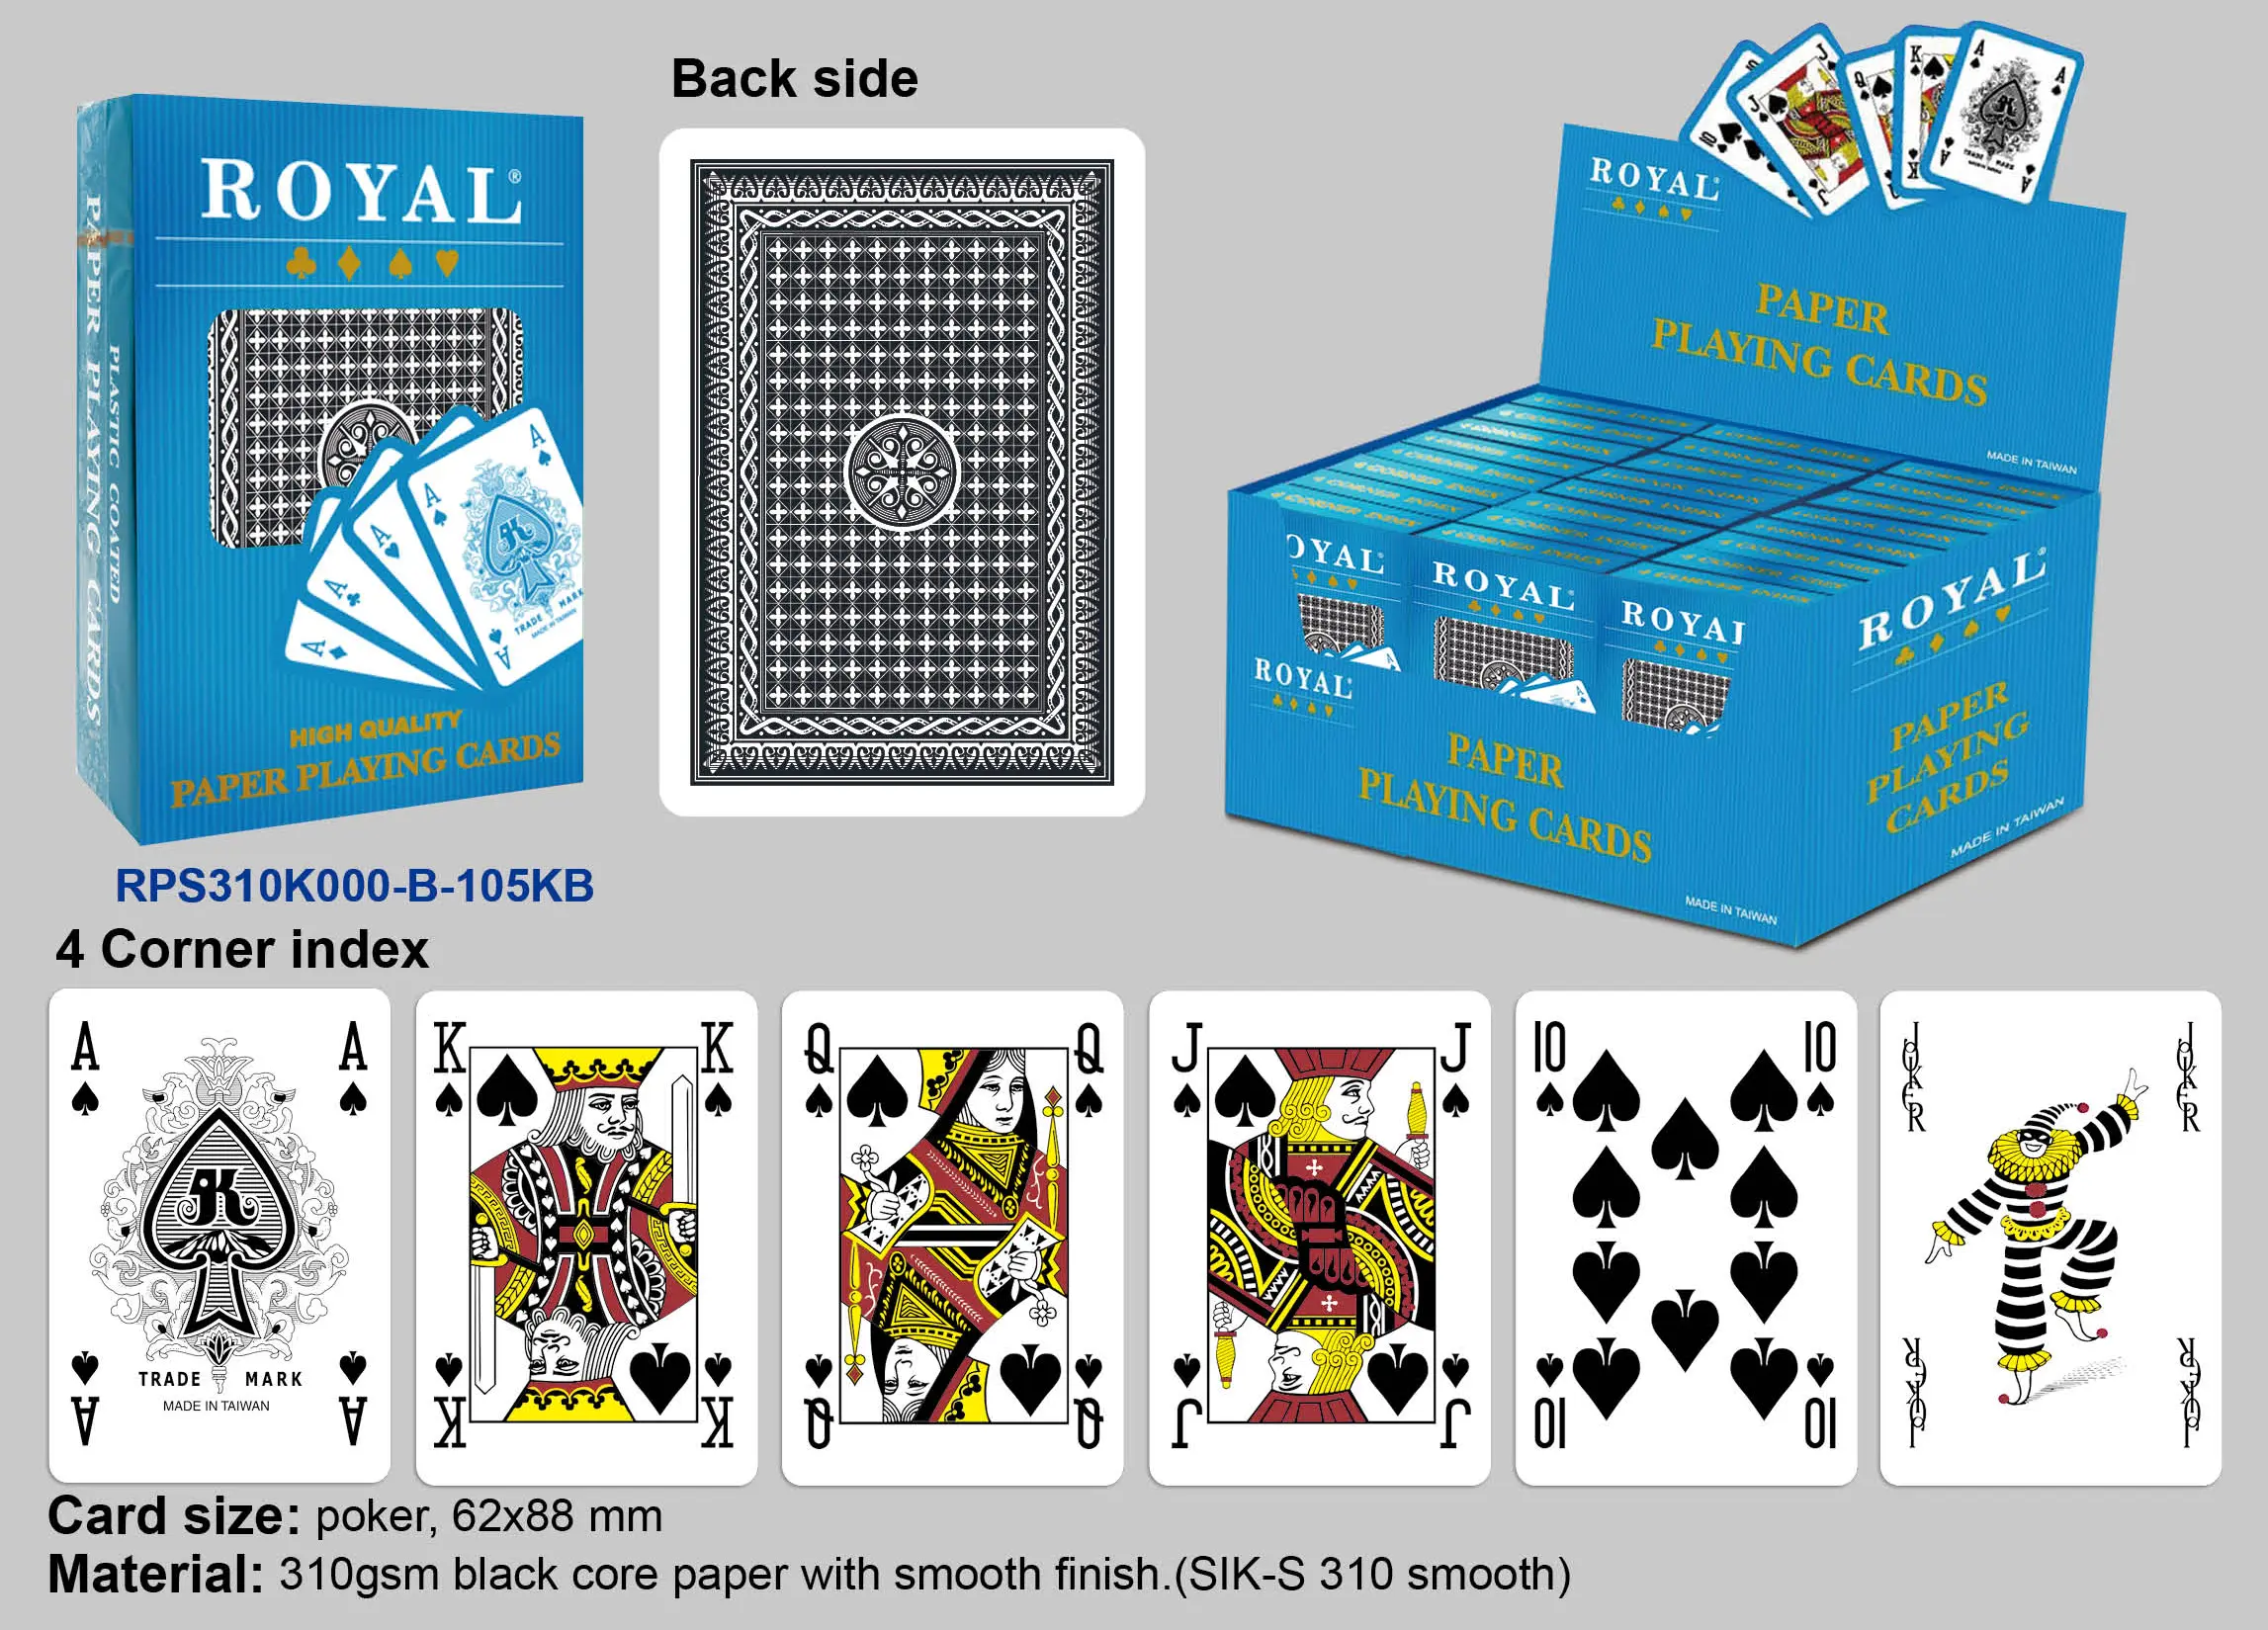 Royal Paper Playing Cards